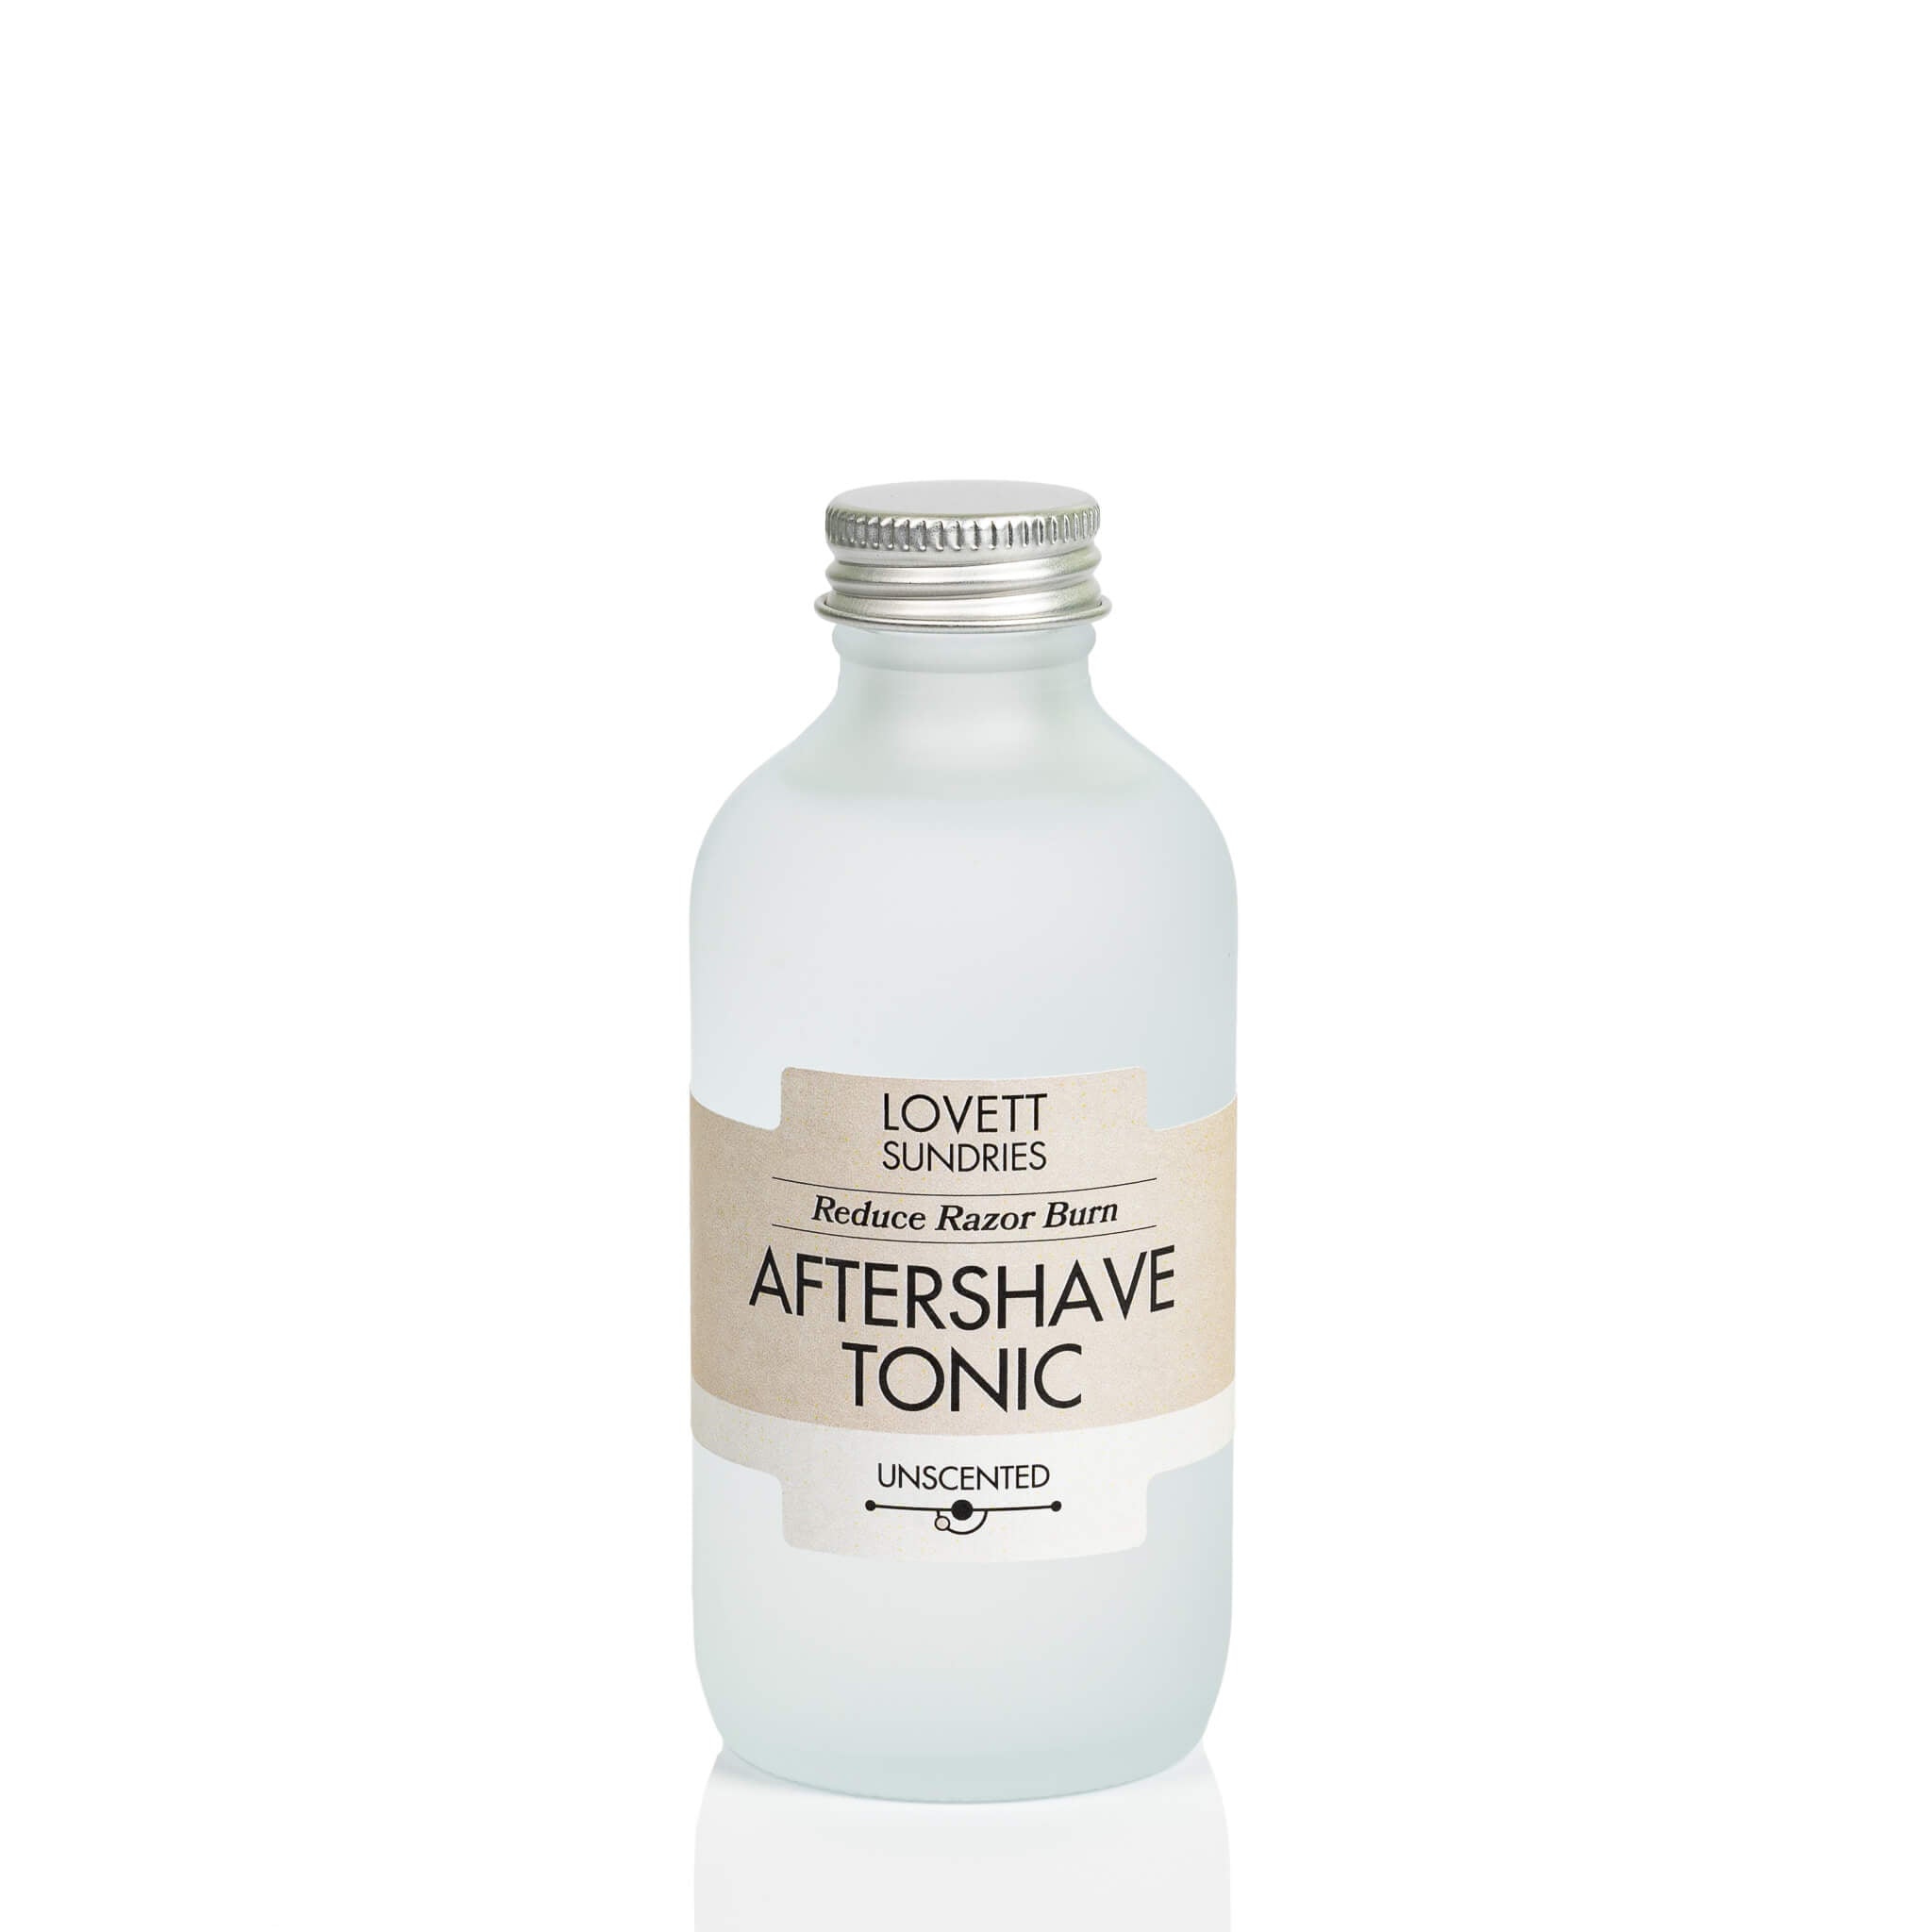 All natural unscented aftershave tonic in a frosted glass bottle.